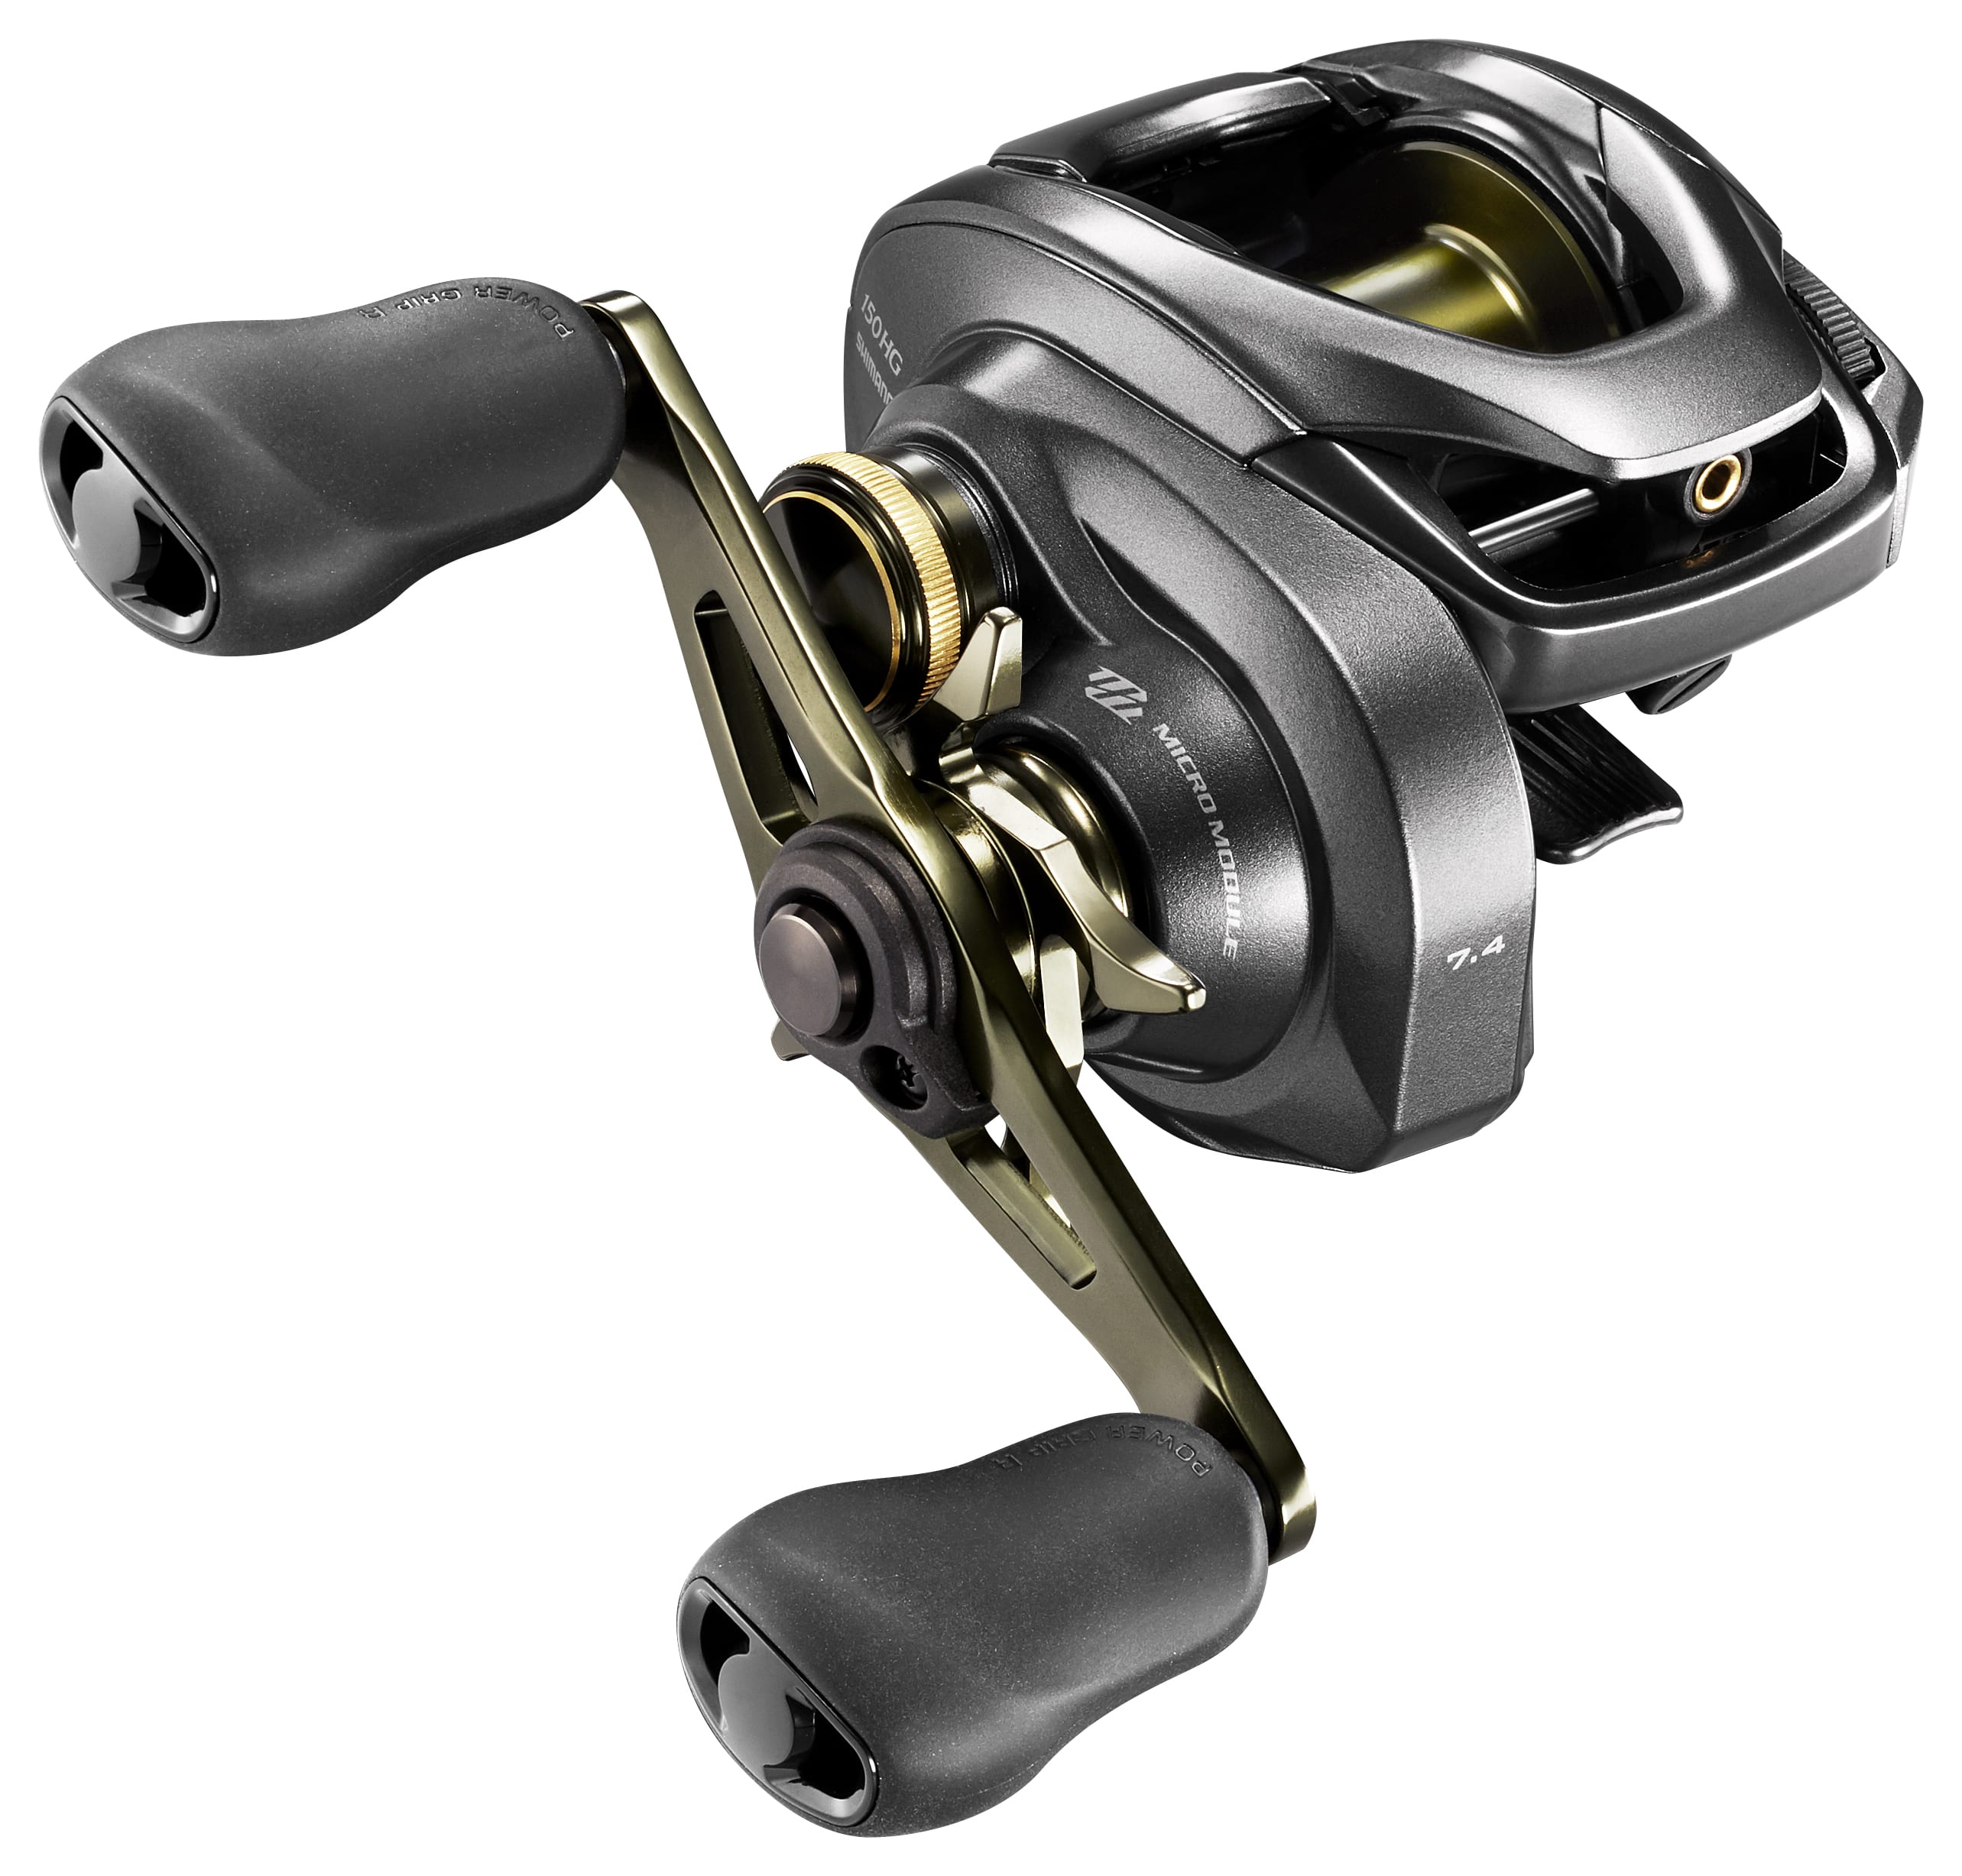 Shimano wins Best Freshwater Reel with Curado DC - Texas Hunting